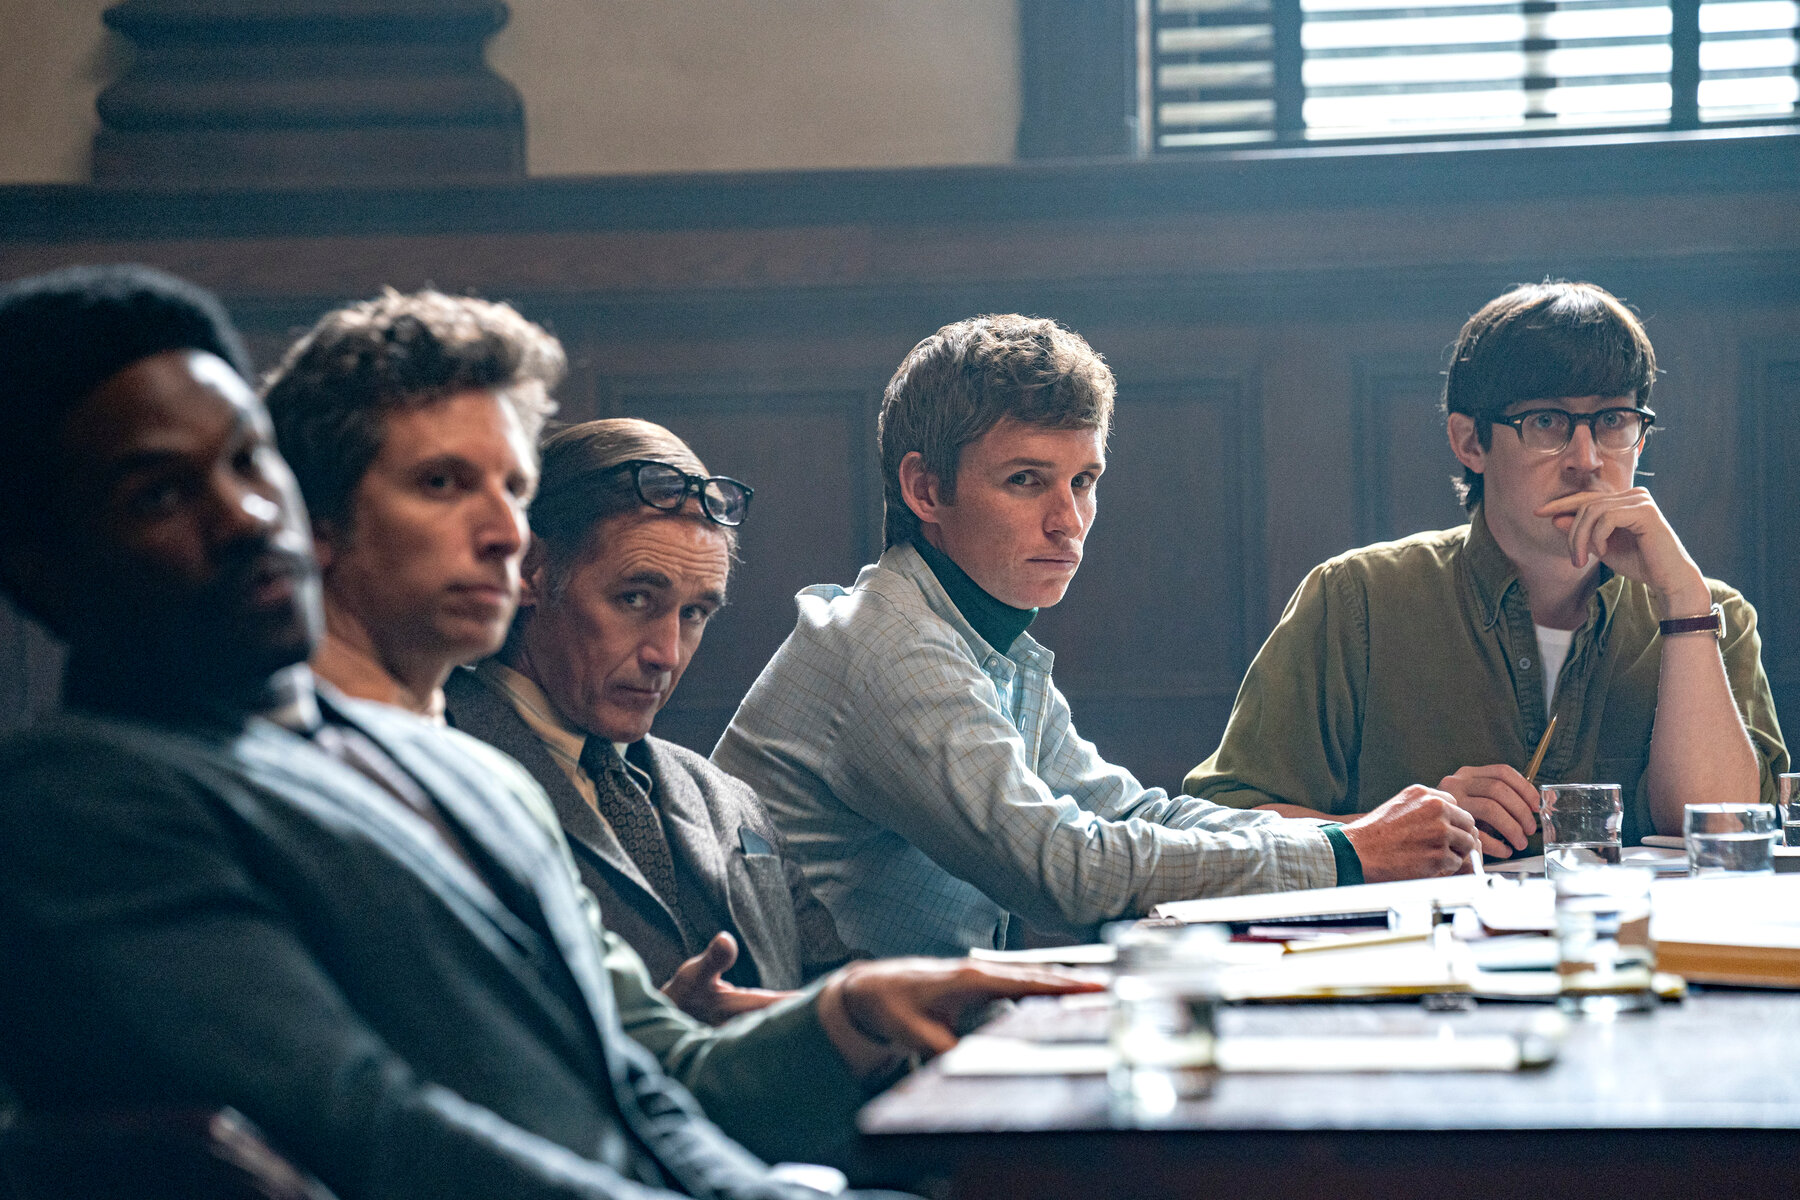 FILM REVIEW | The Trial of the Chicago 7 is a fascinating and gripping courtroom drama says Lewis Pearce